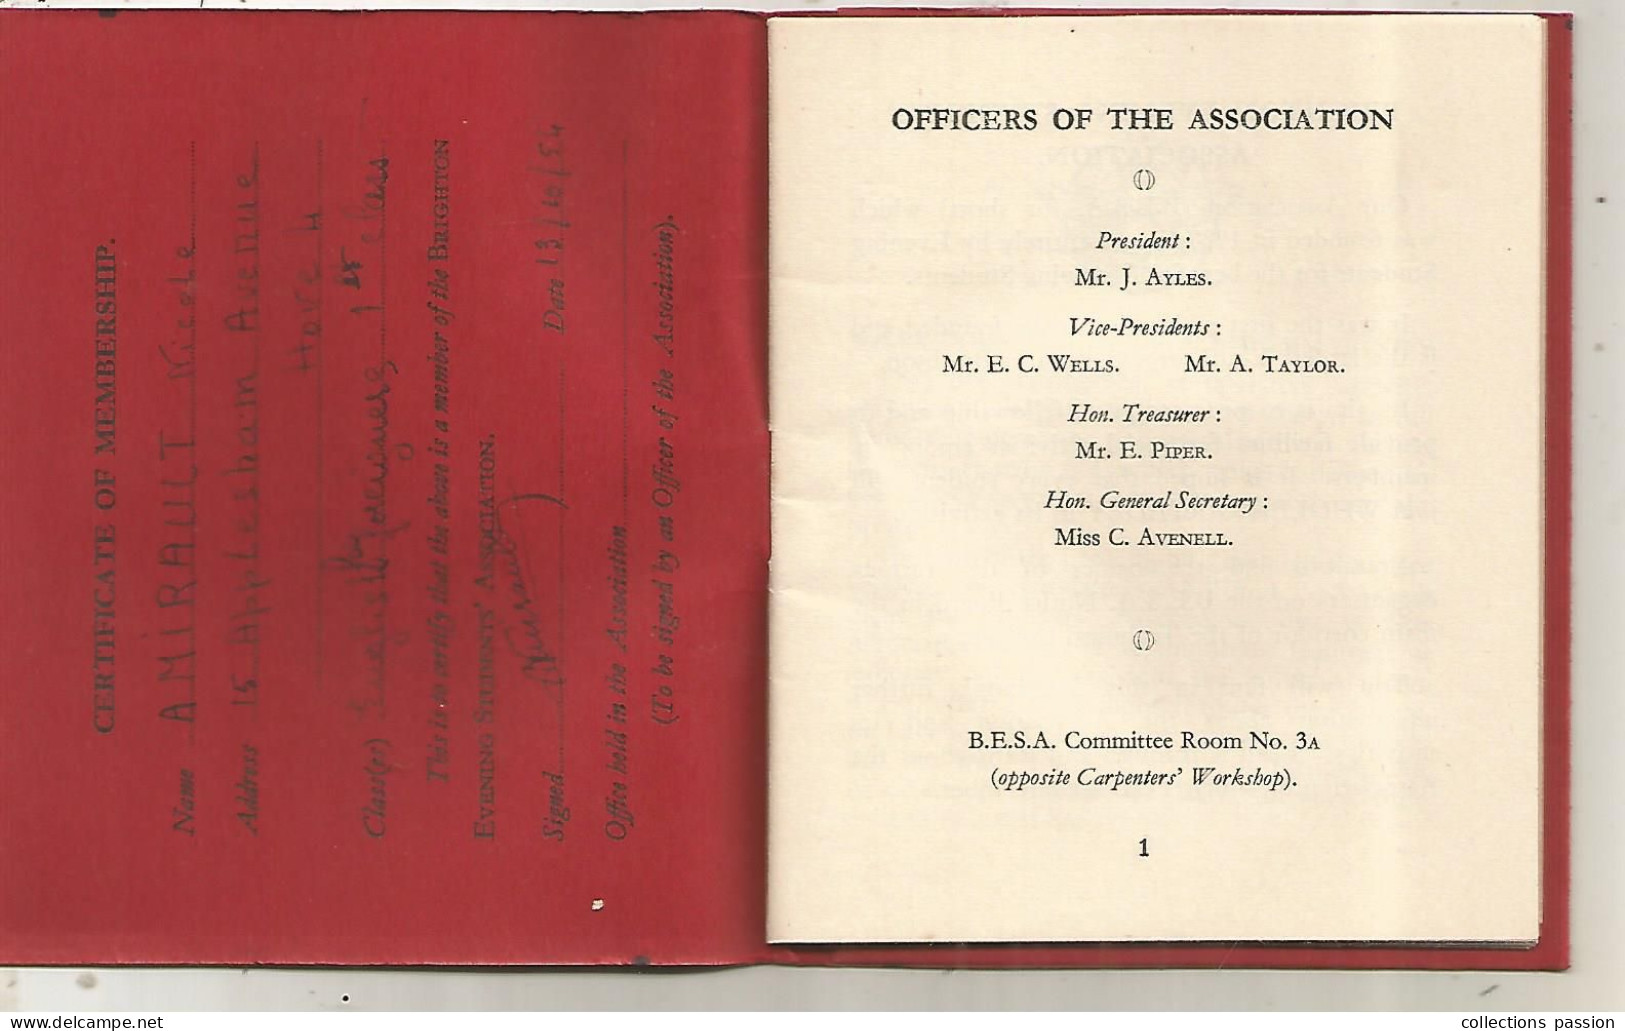 CERTIFICATE OF MEMBERSHIP, 1954, The BRIGHTON Evening Student's Association, 40 Pages, Frais Fr 3.35 E - Membership Cards